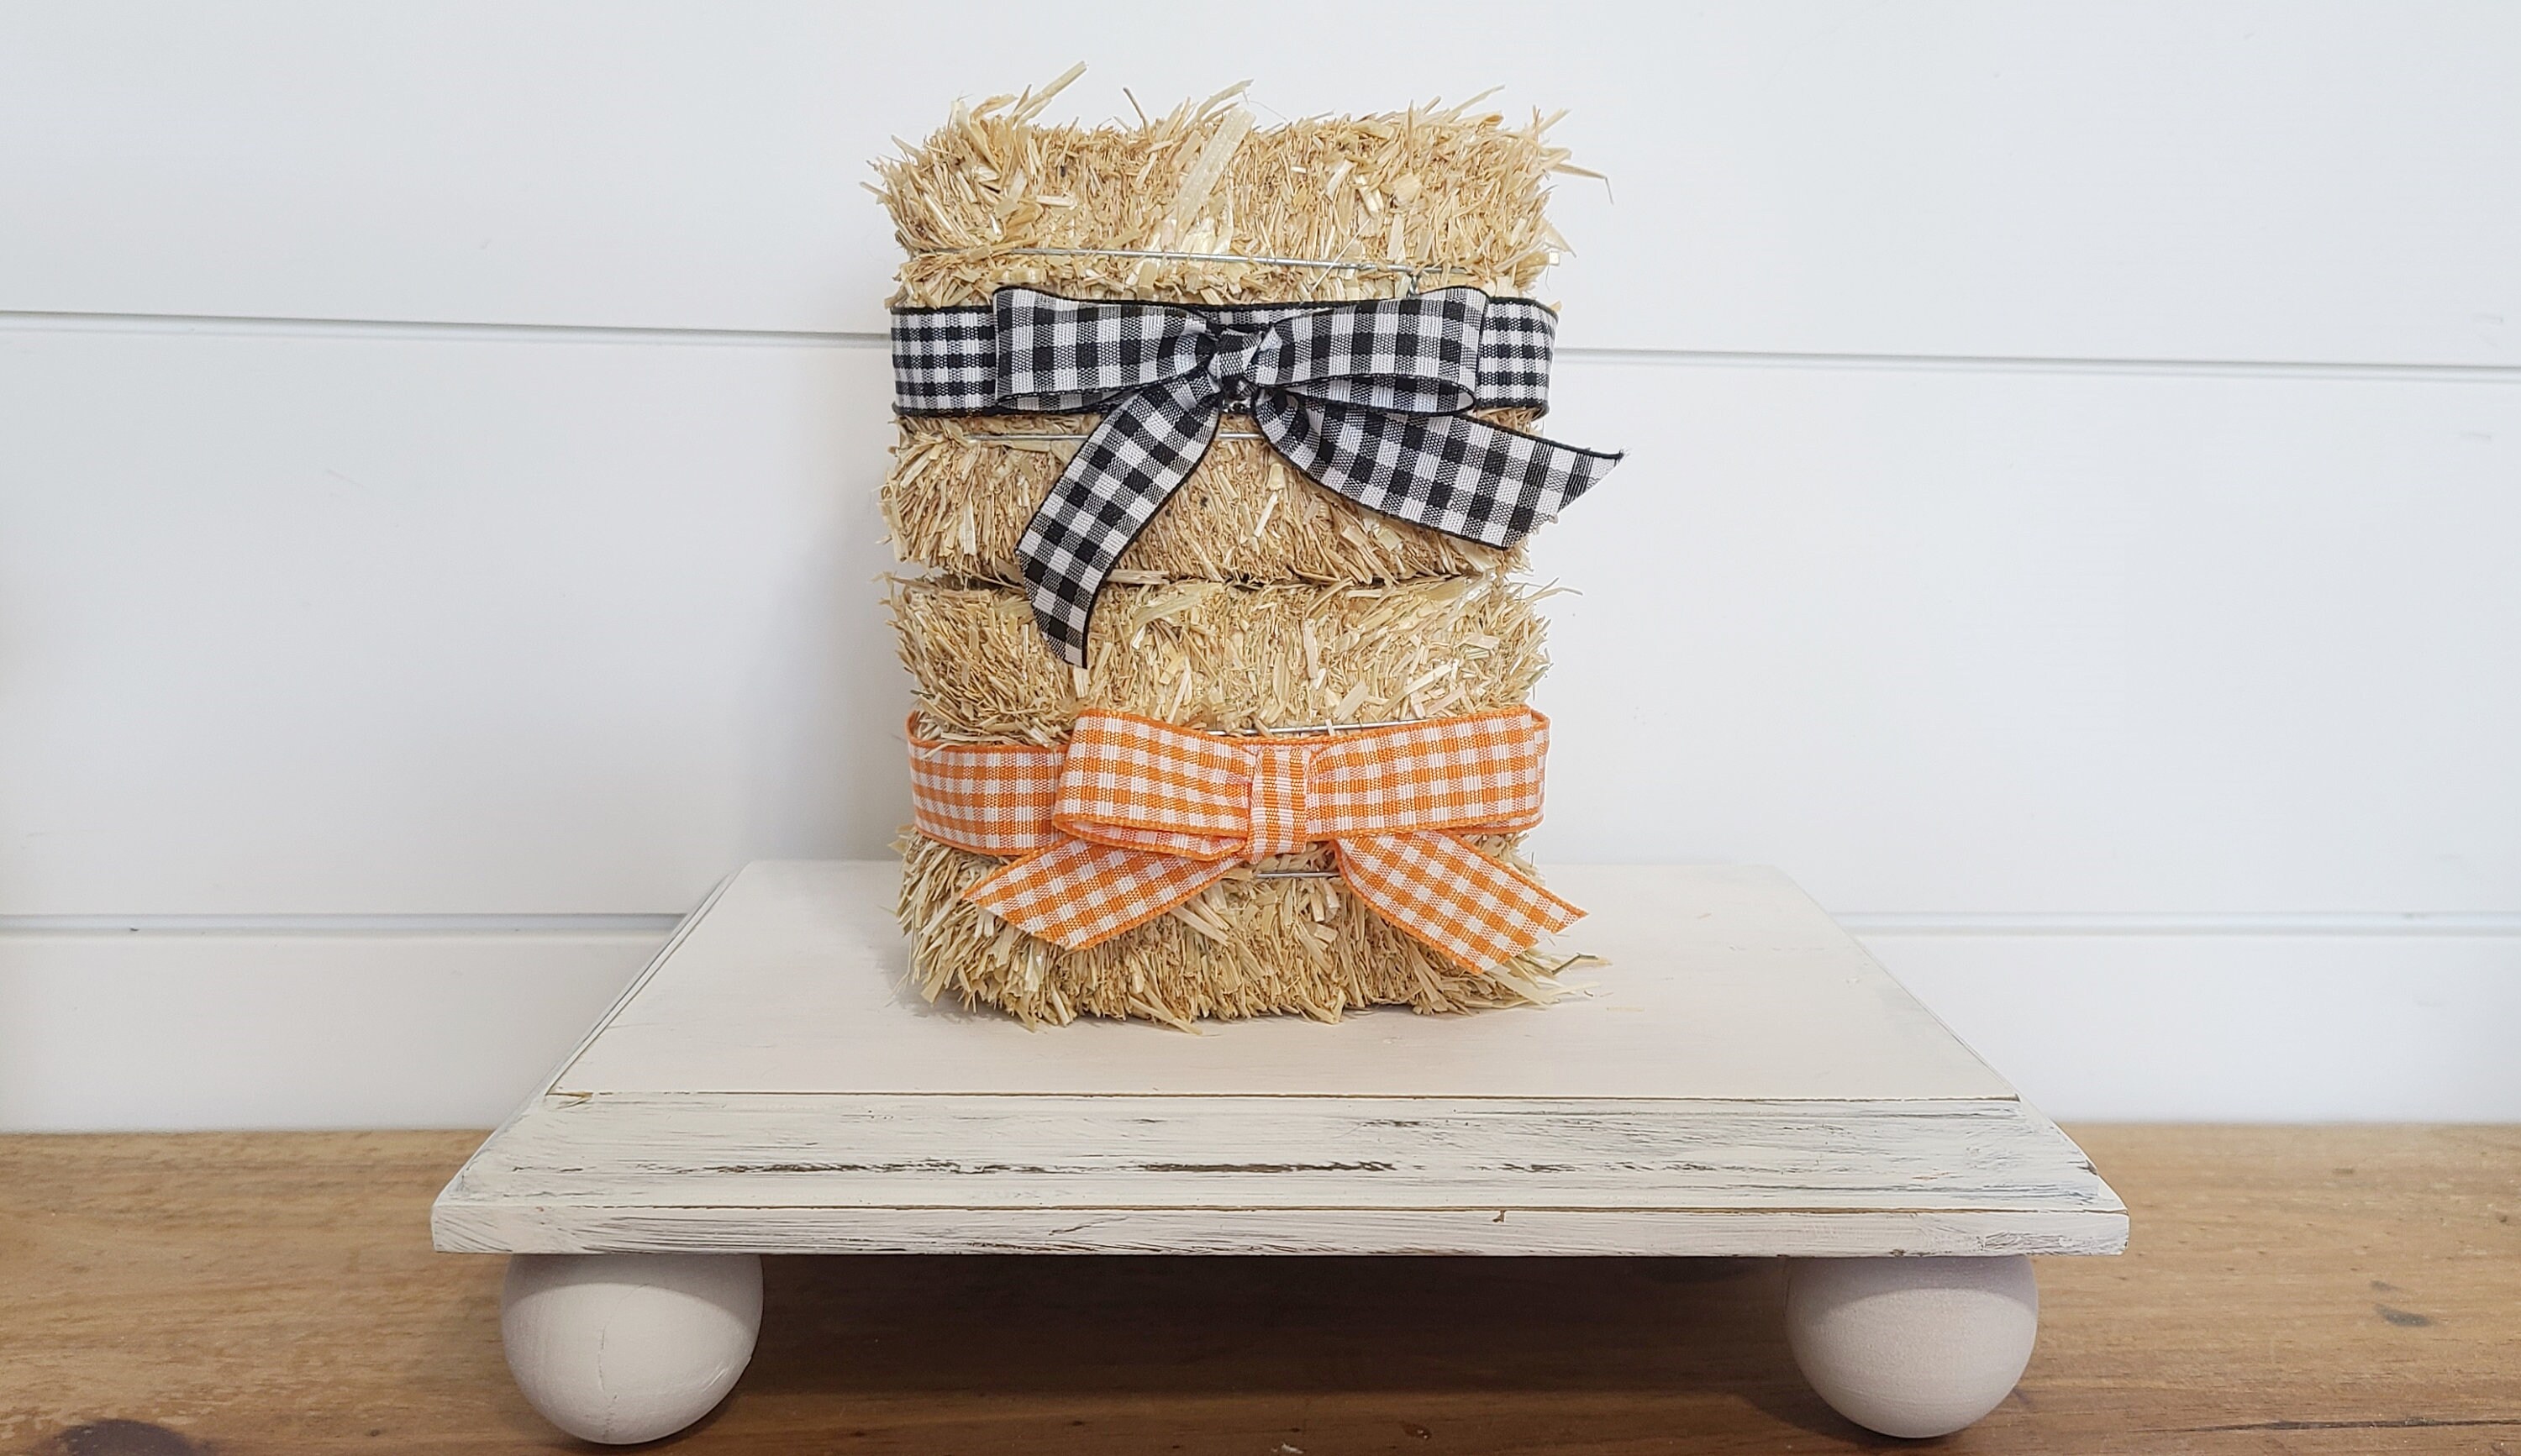 Miniature Hay Bales Mini Hay Bale for Tiered Tray Fall Tiered Tray